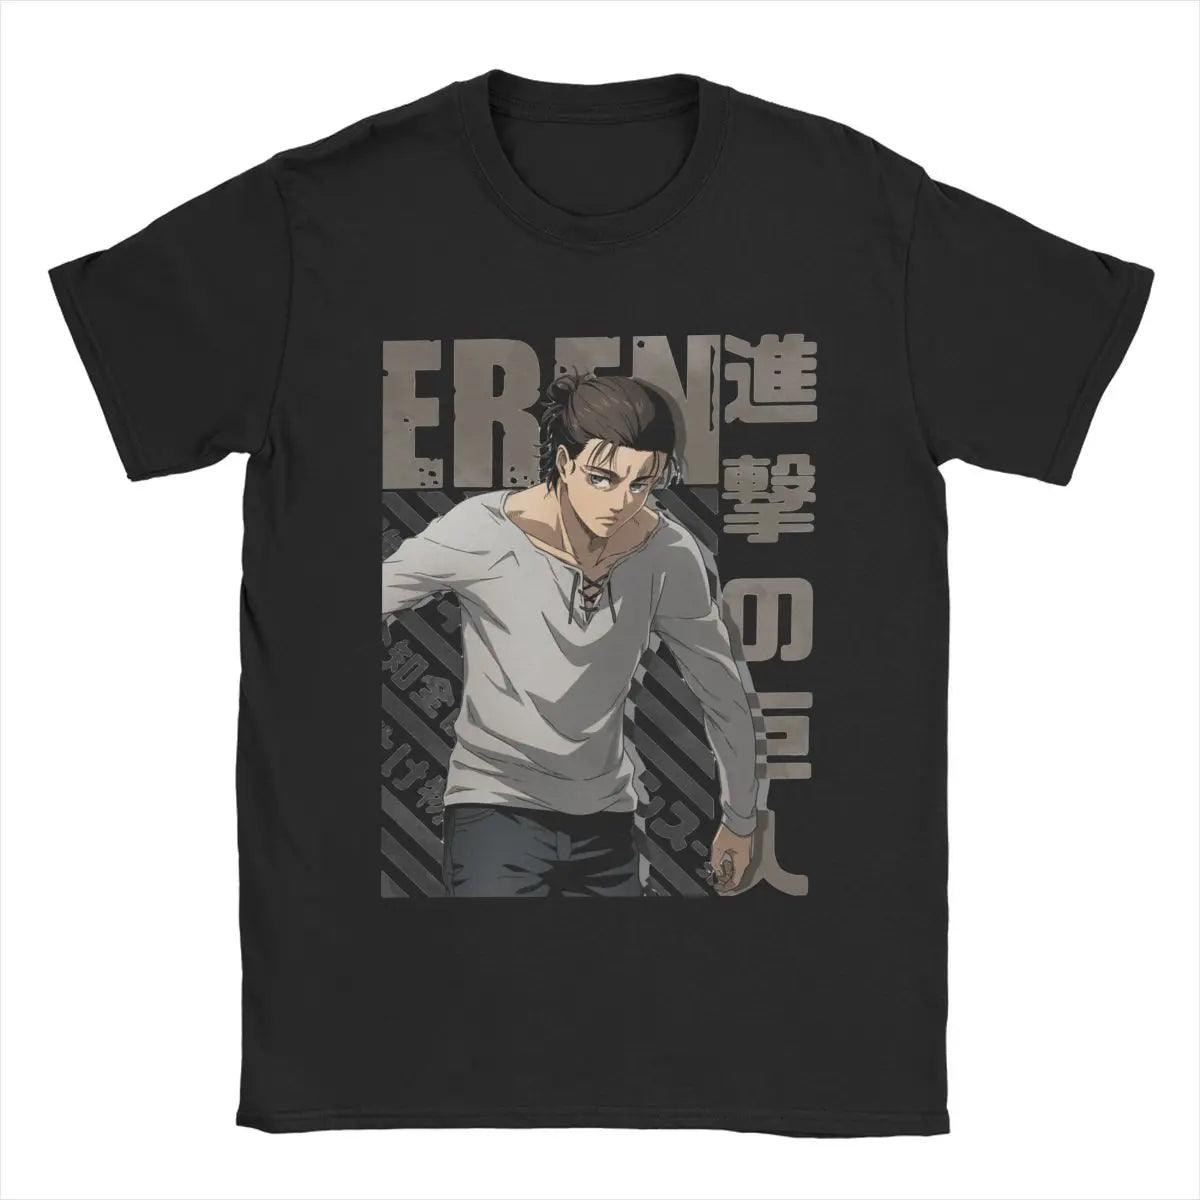 Attack on Titan Eren Yeager Cotton T-Shirts (5 Colors) - AnimeGo Store